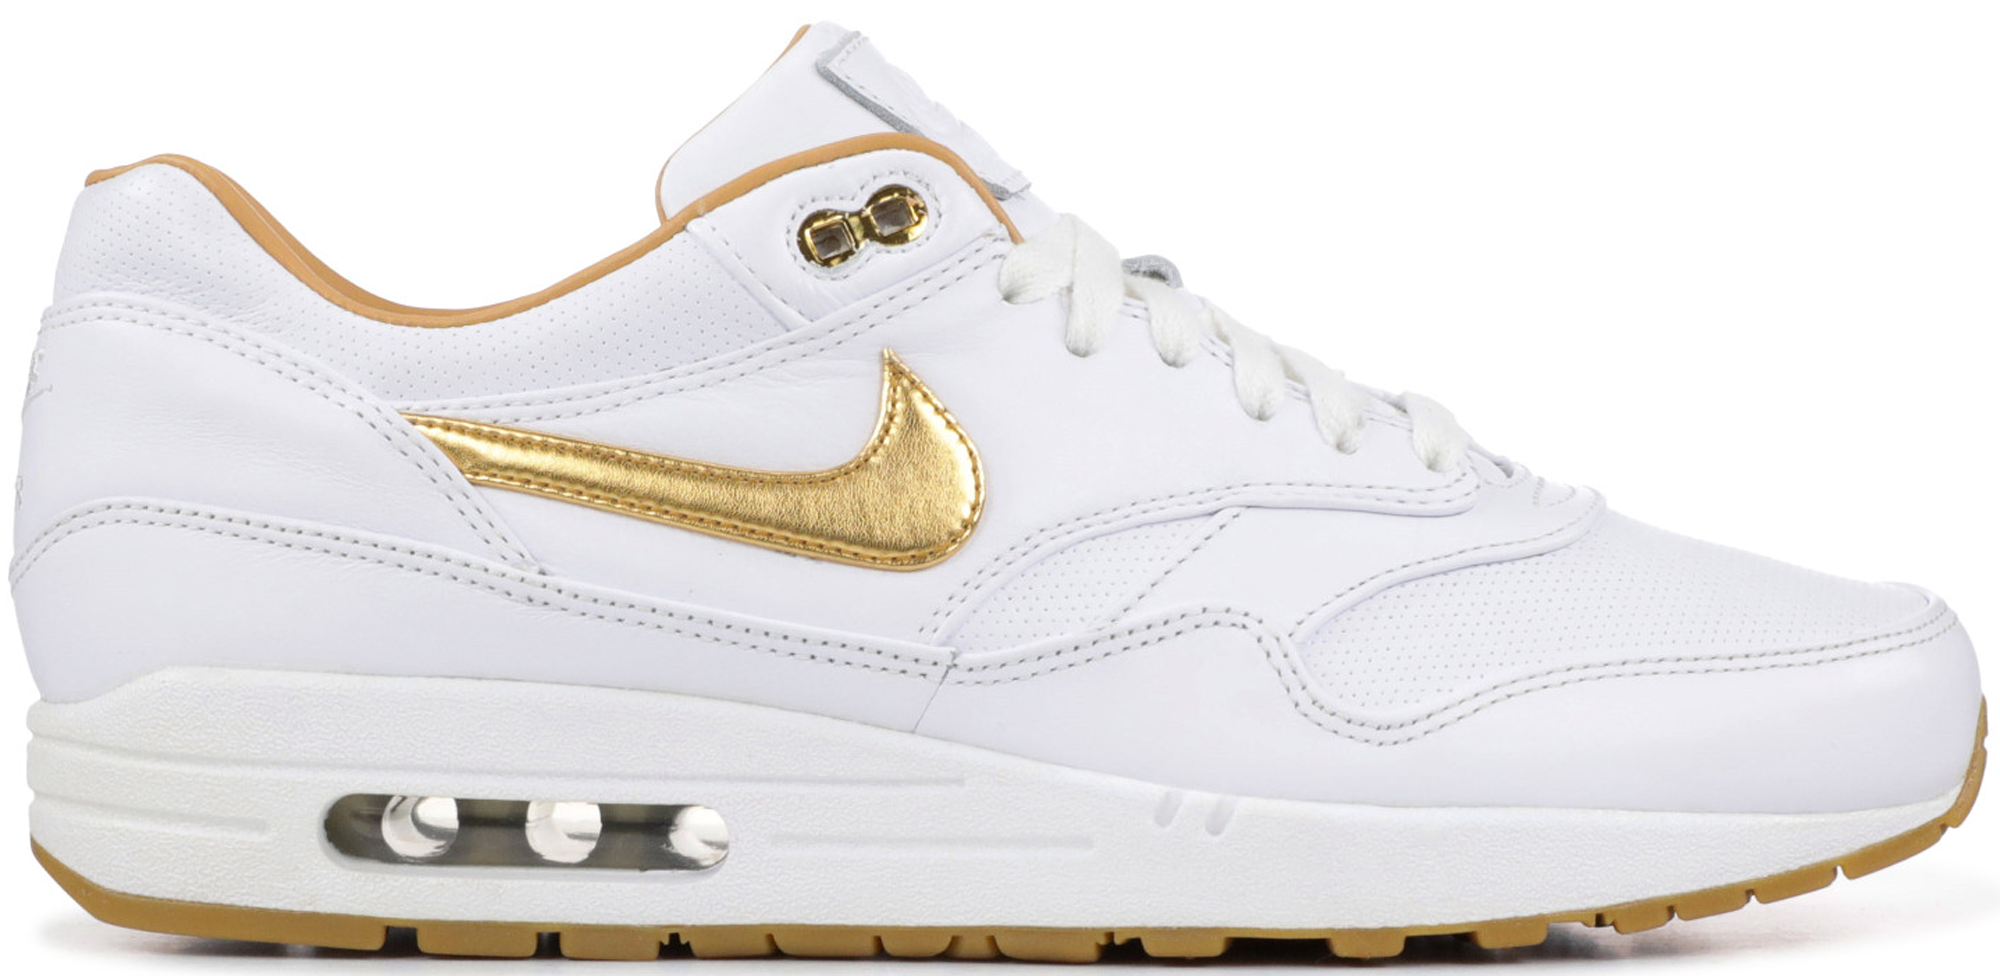 nike air max 1 white and gold